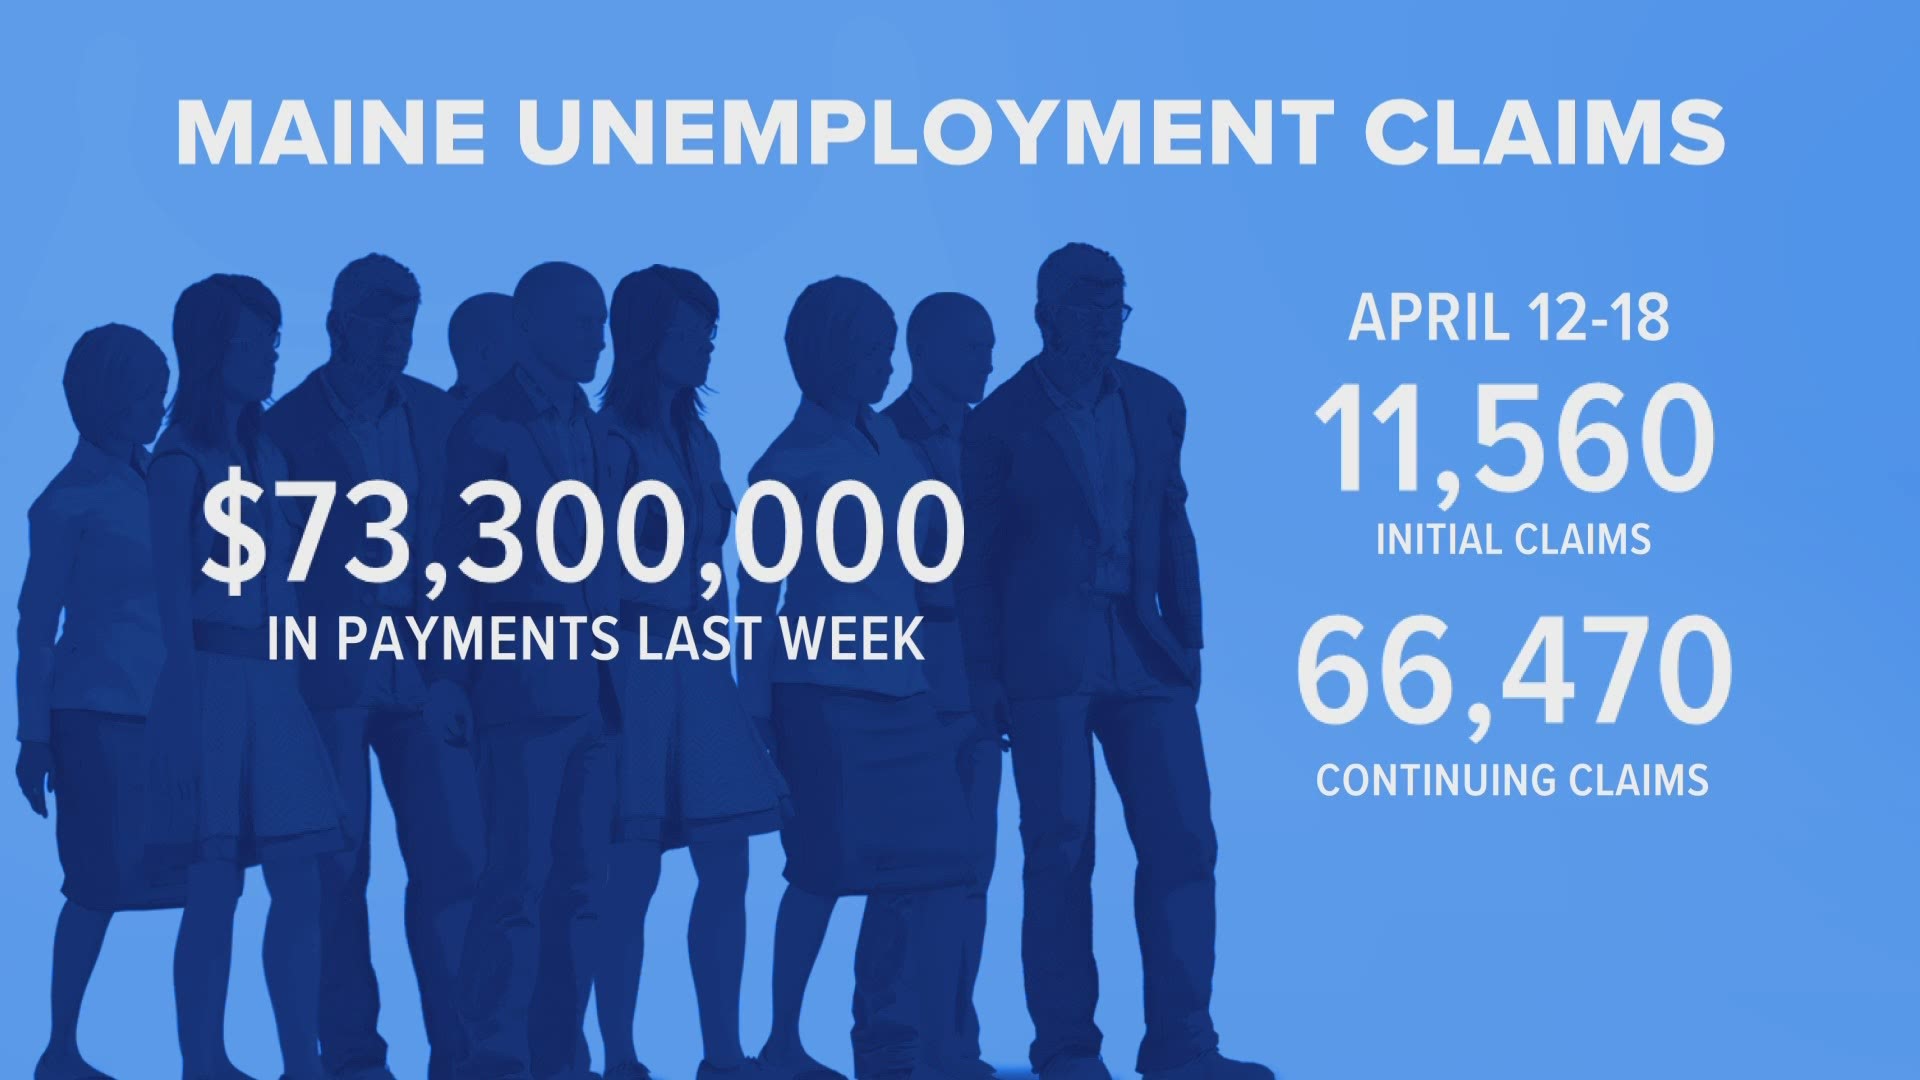 Last week saw its first drop in first-time unemployment claims in weeks. The week of April 18 is seeing another drop. However, self-employed Mainers yet to get help.